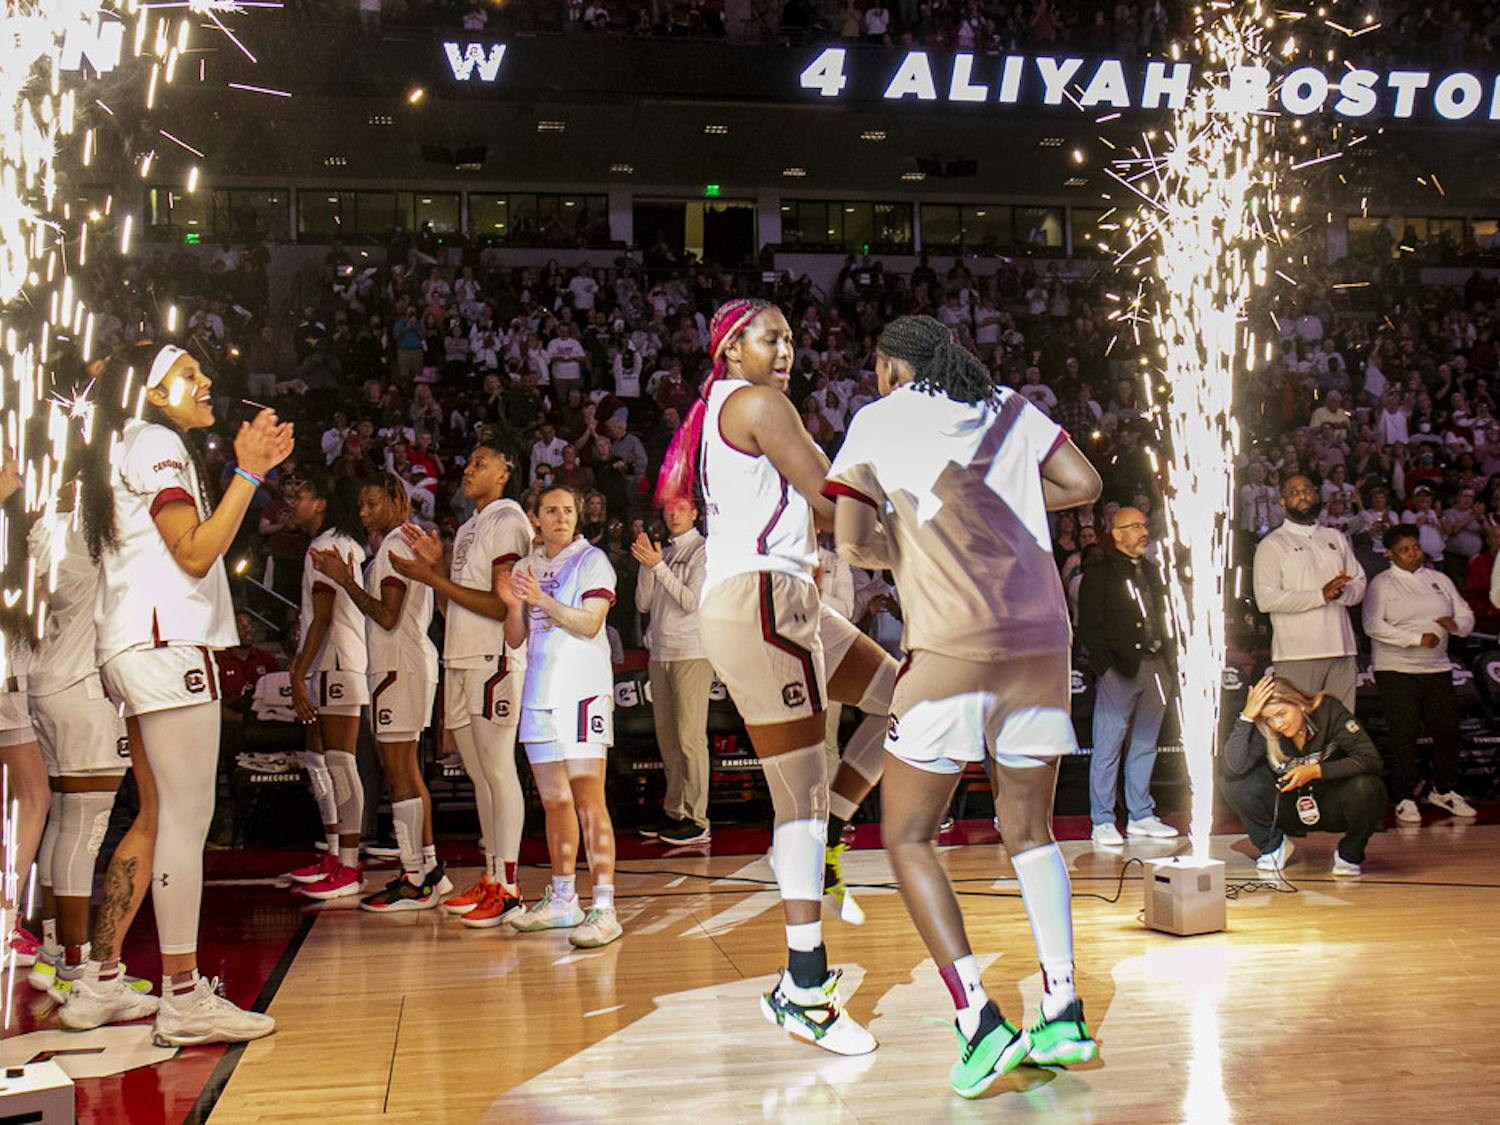 Senior forward Aliyah Boston (left) and sophomore guard Bree Hall (right) hype each other up during South Carolina's introduction before the match against Florida at Colonial Life Arena on Feb. 16, 2023. The Gamecocks beat the Gators 87-56.